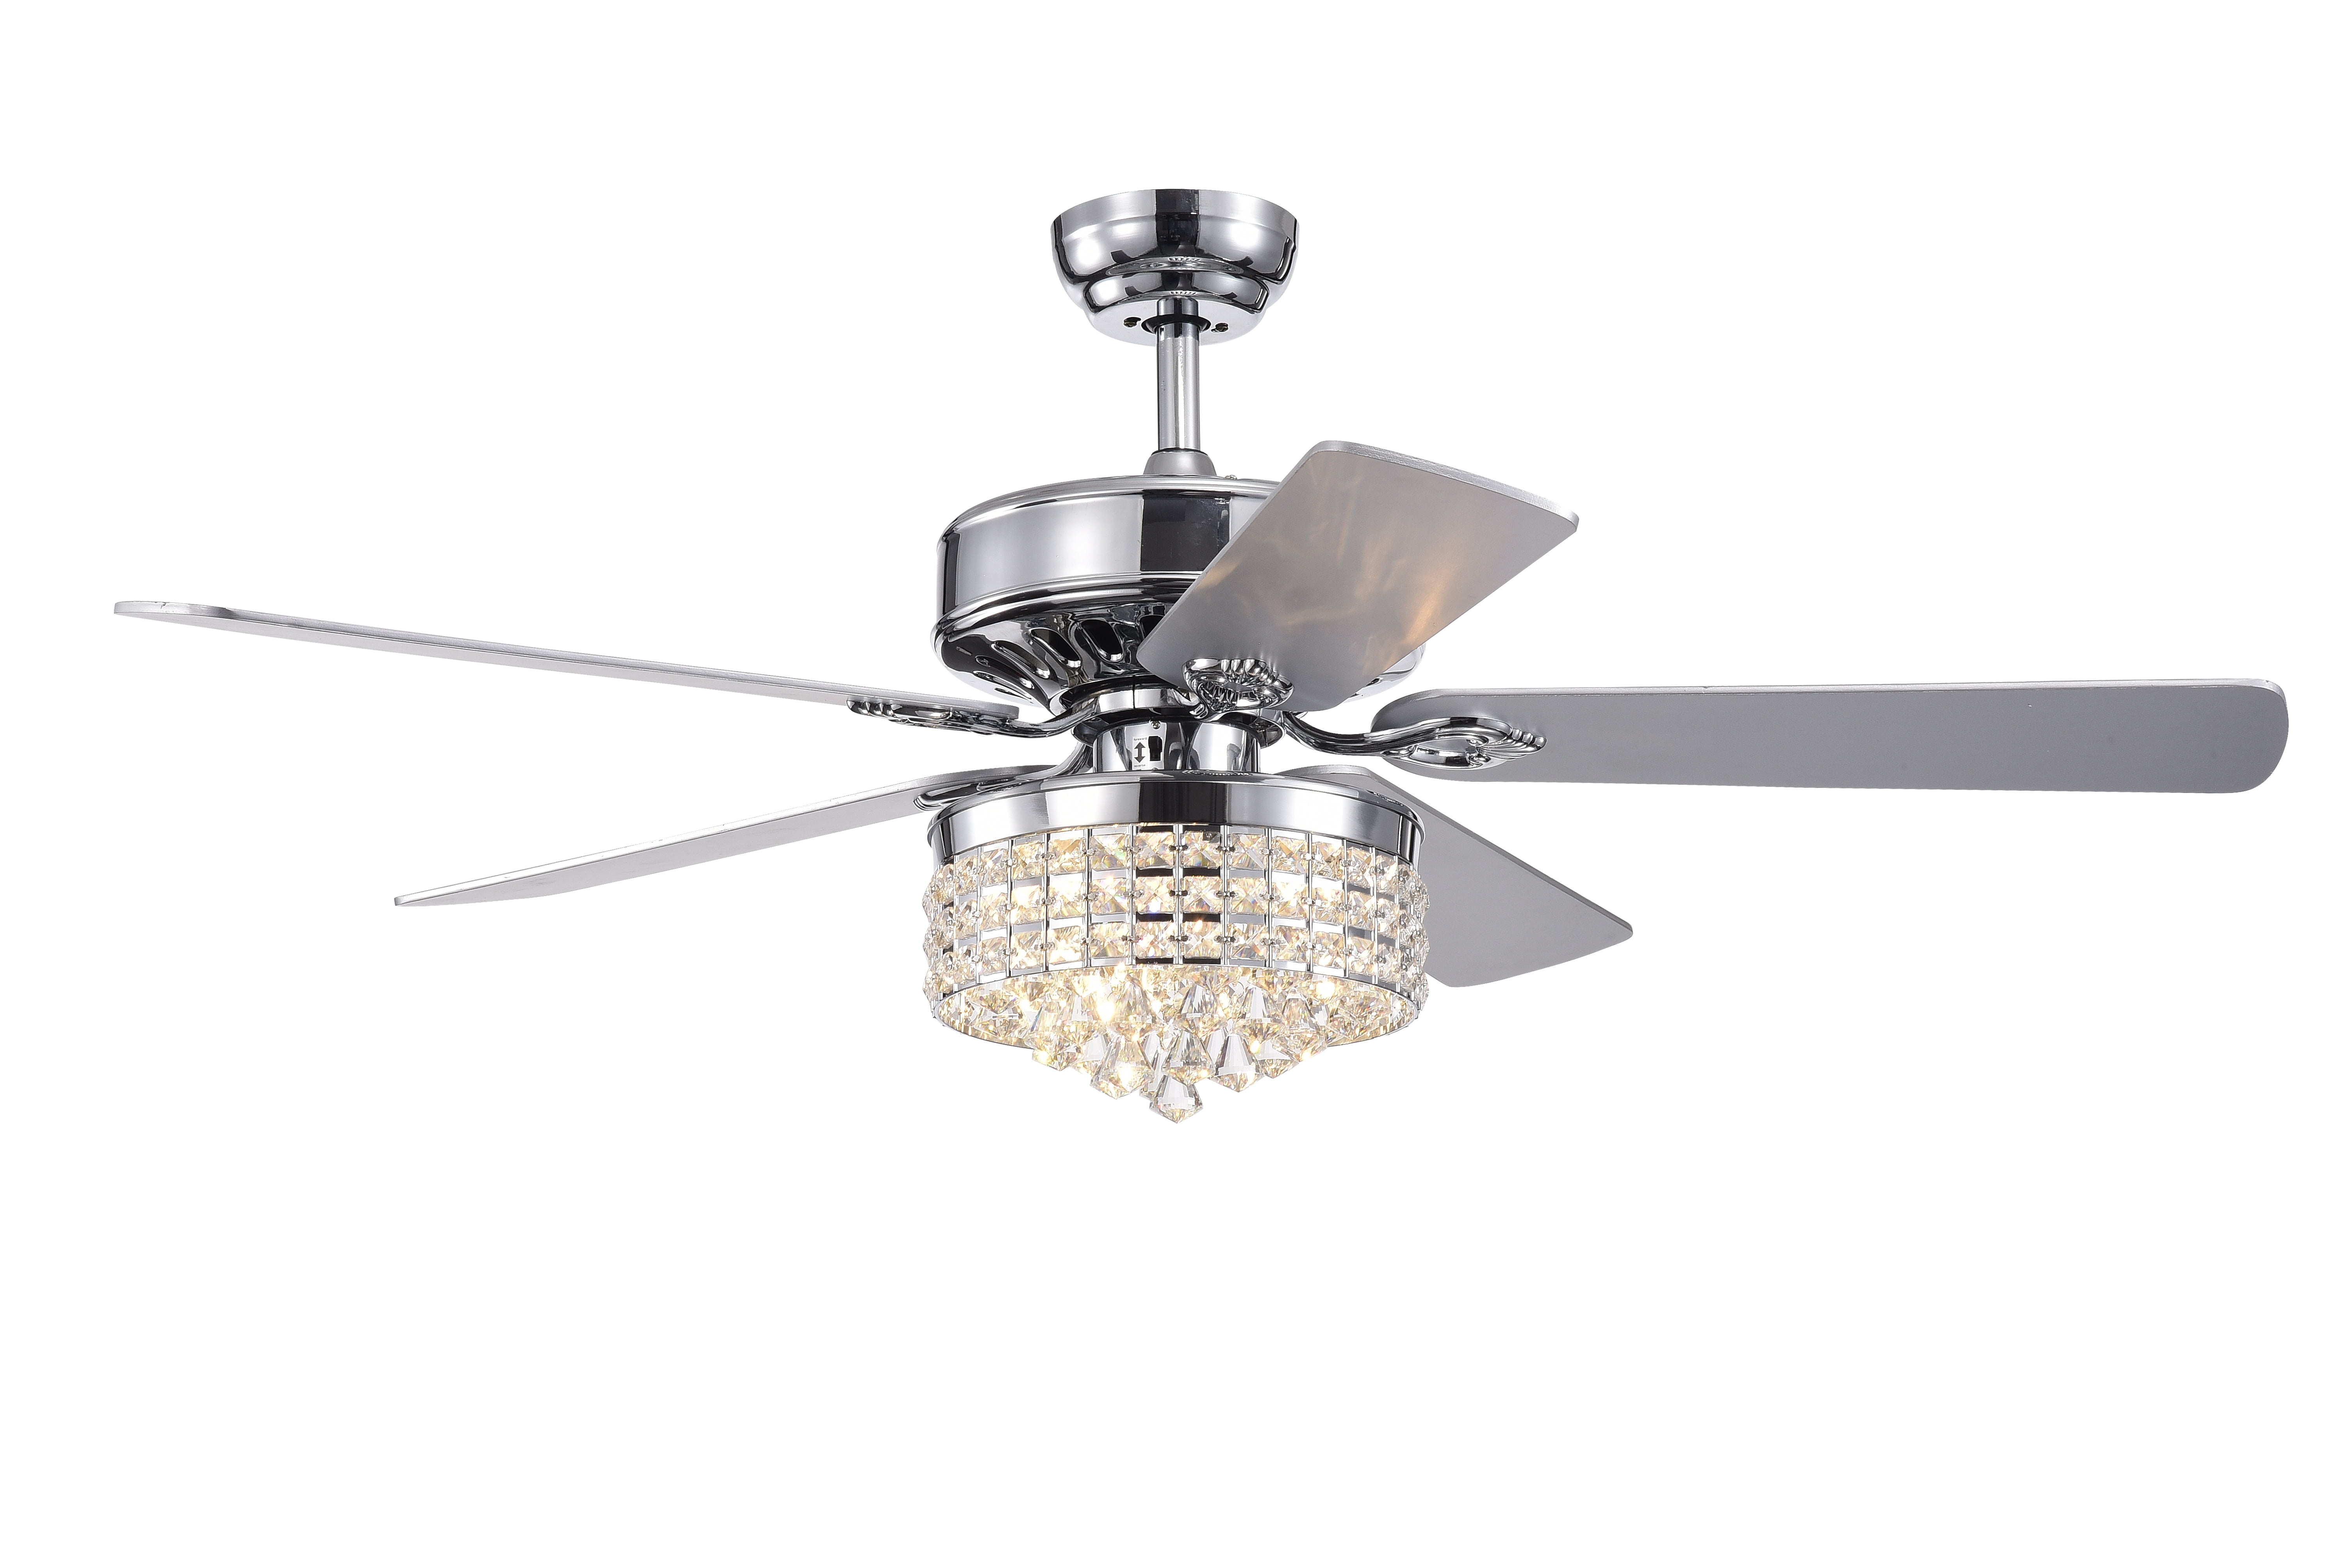 Letta Chrome 52-Inch 4-light 5-Blade Lighted Ceiling Fan Crystal Shade 2 Blade Colors (Optional Remote)